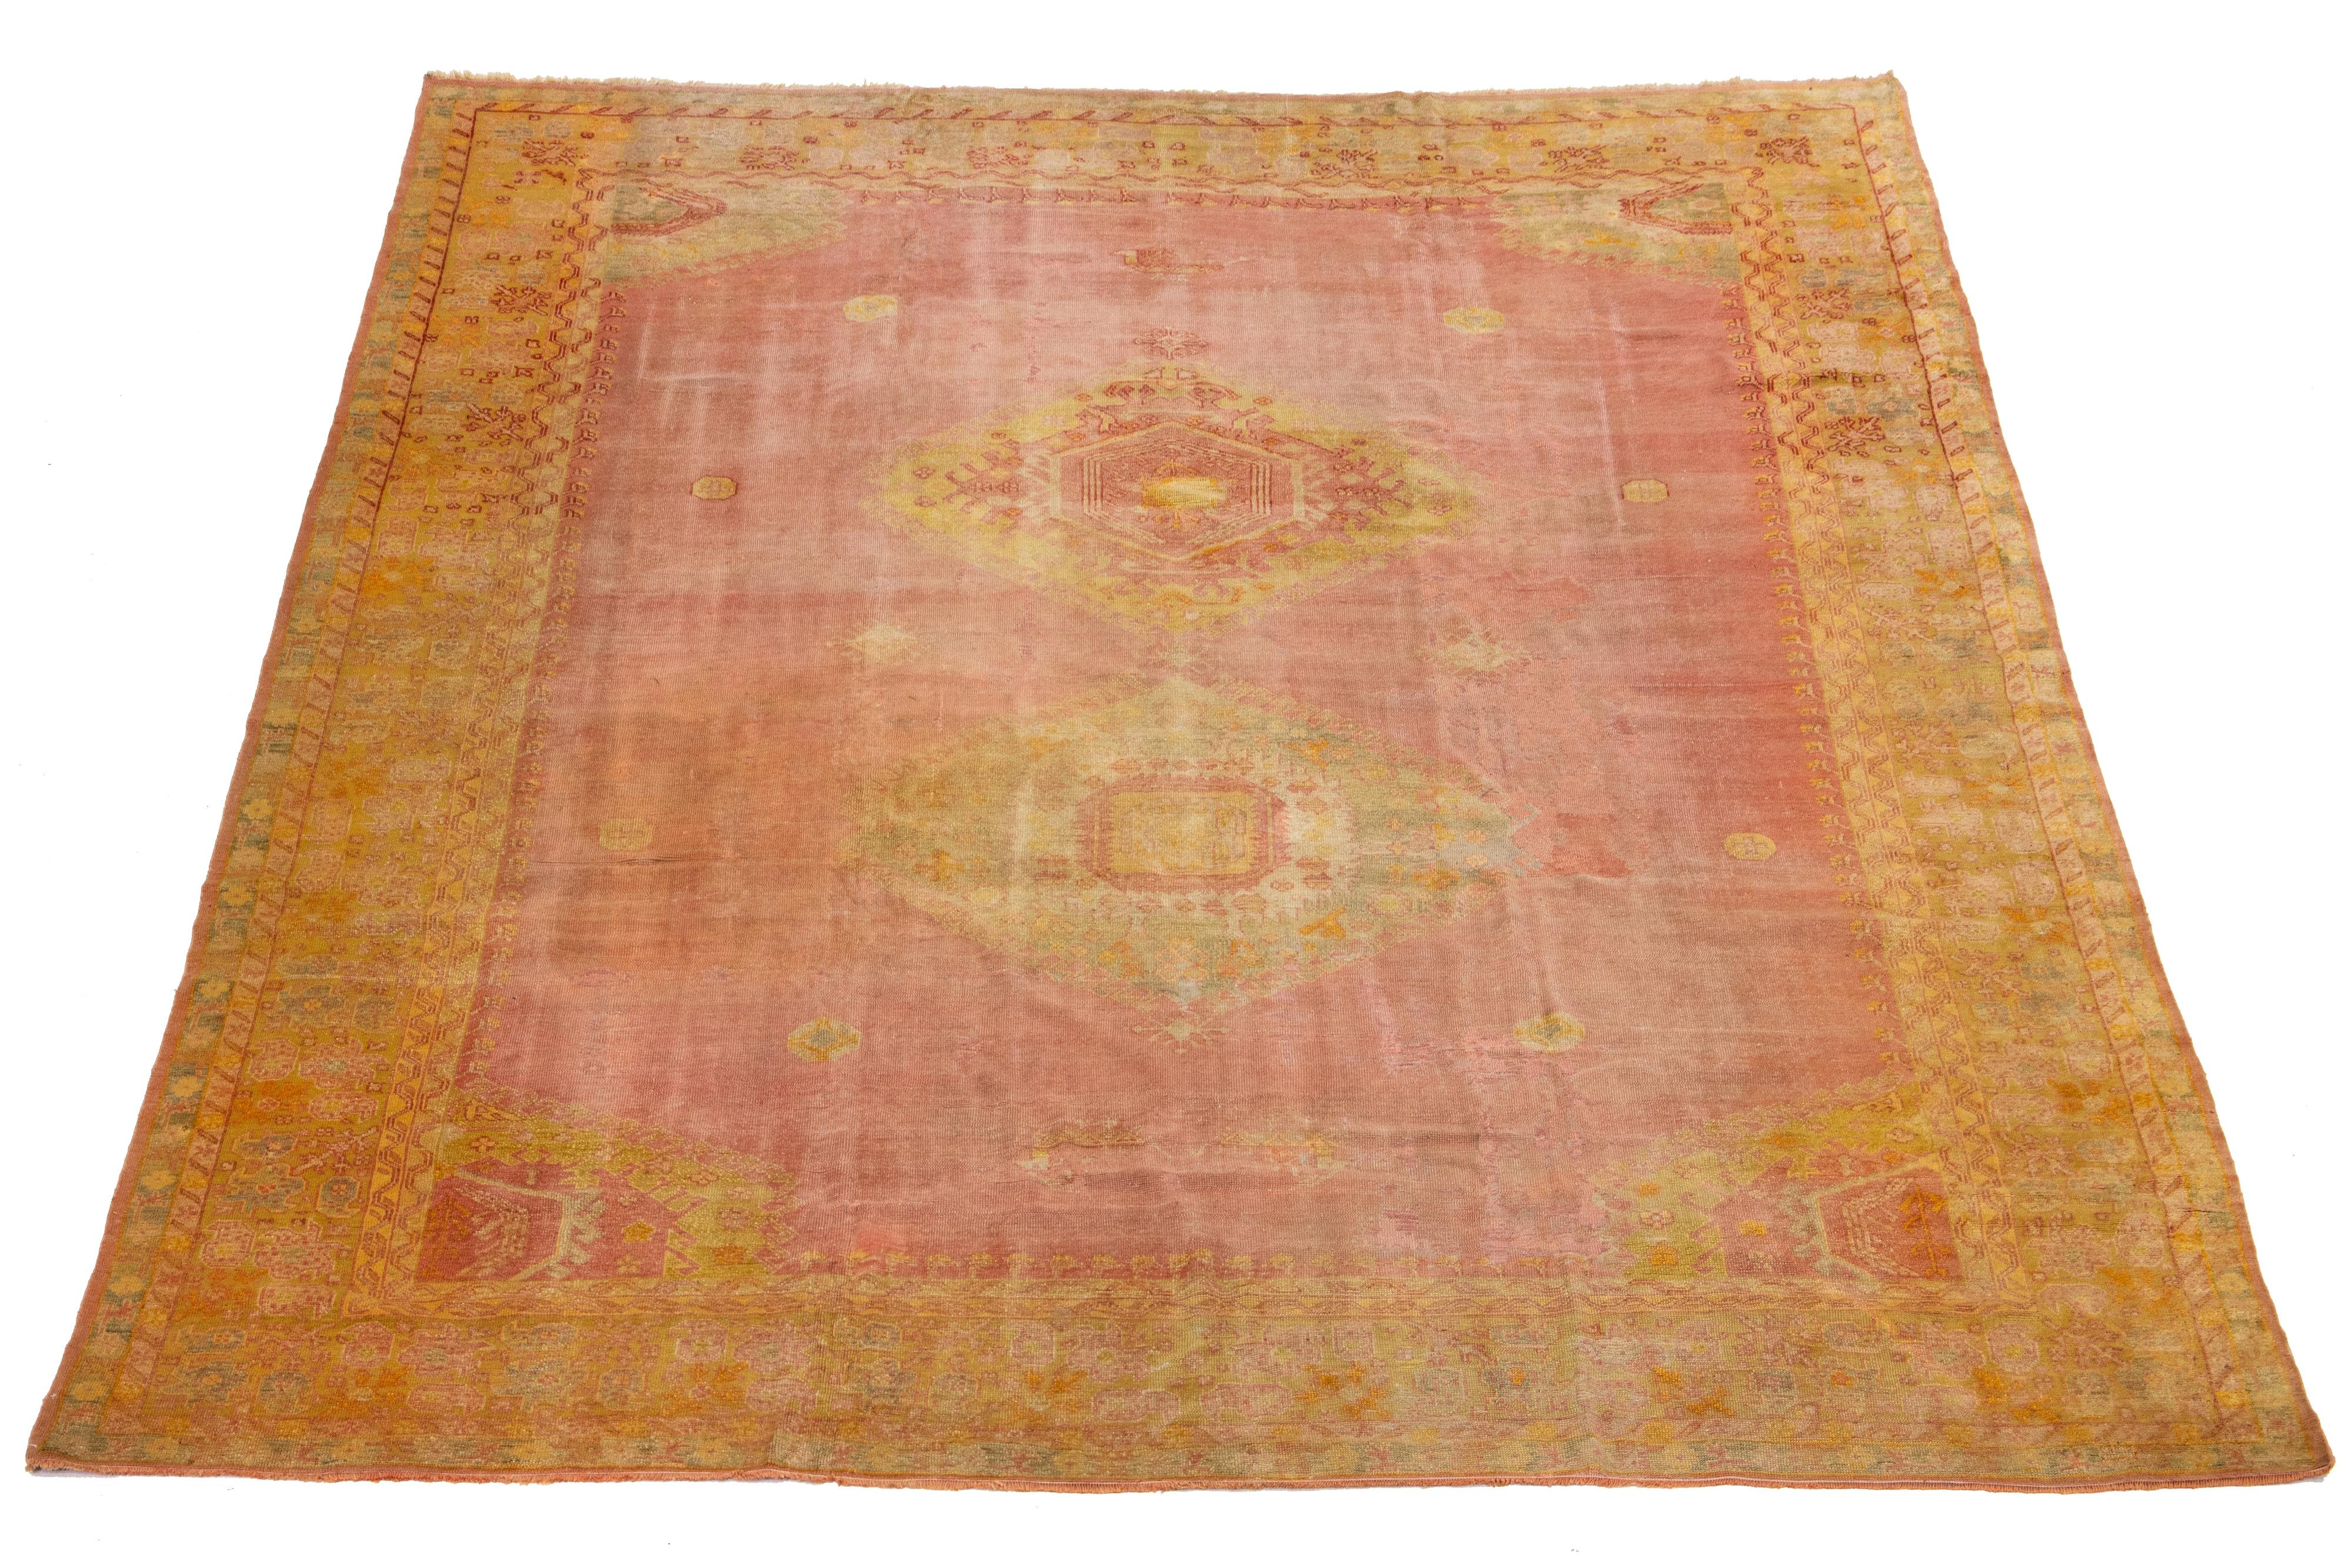 This antique Turkish Oushak rug is a one-of-a-kind piece, hand-knotted with high-quality wool. The striking terracotta color field and intricate medallion motif design with yellow and beige accents make it a true statement piece.

This rug measures